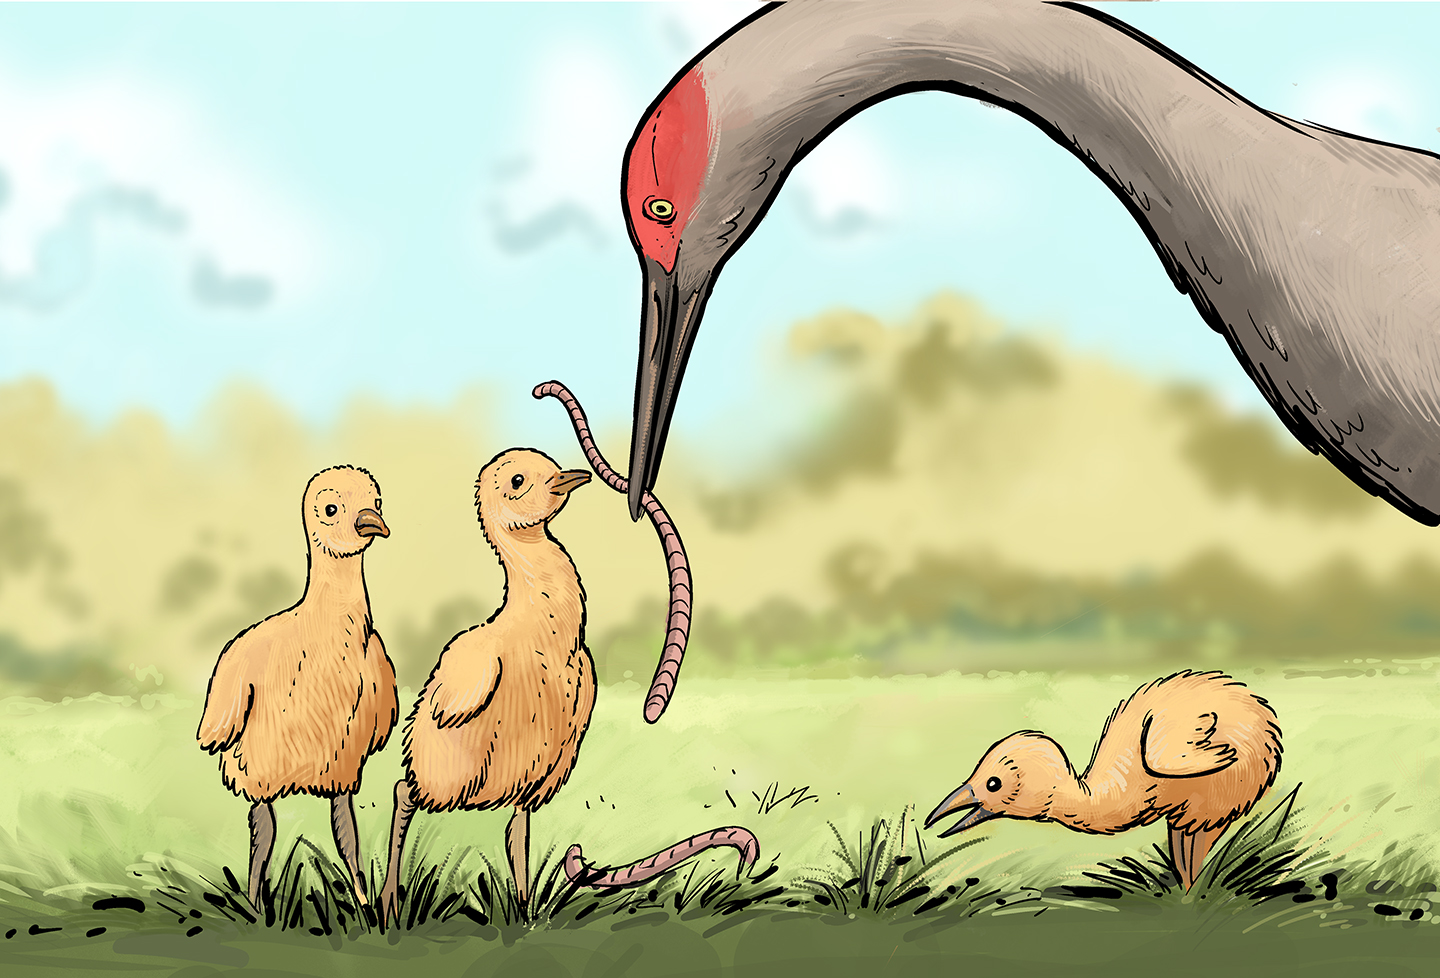 An adult crane distributes worms to three small chicks.